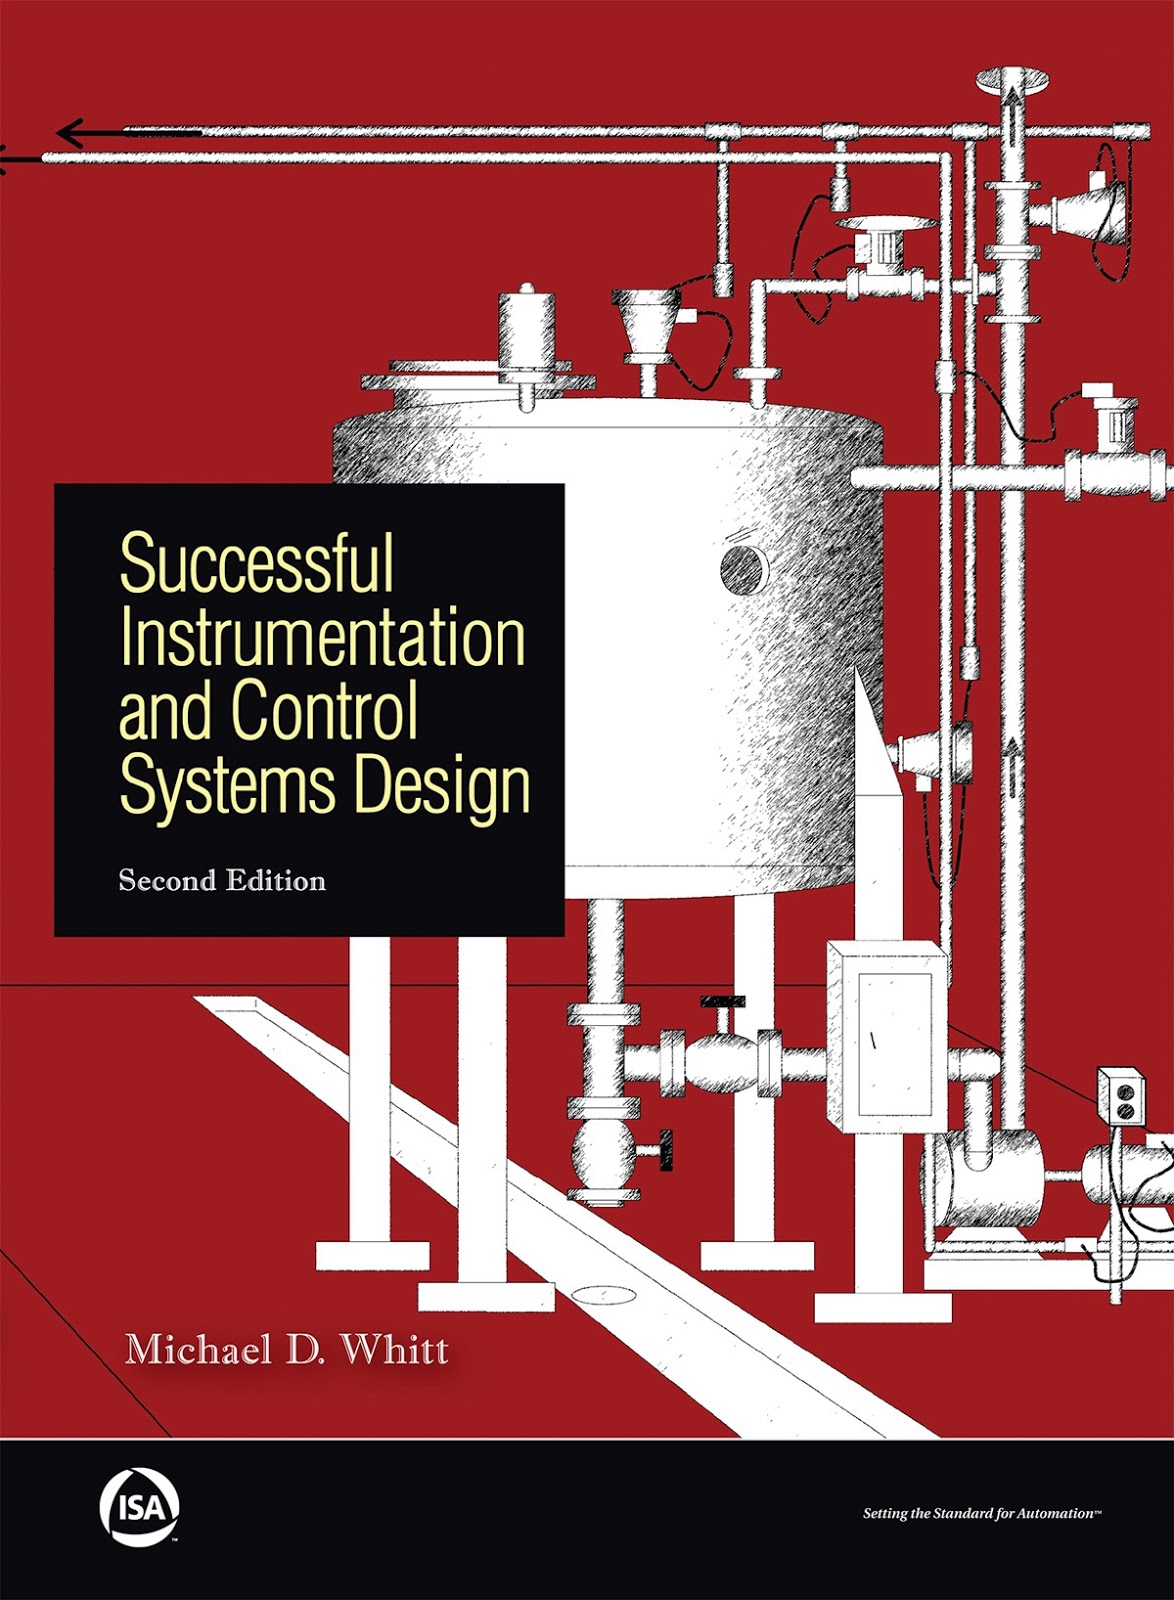 thesis on instrumentation and control